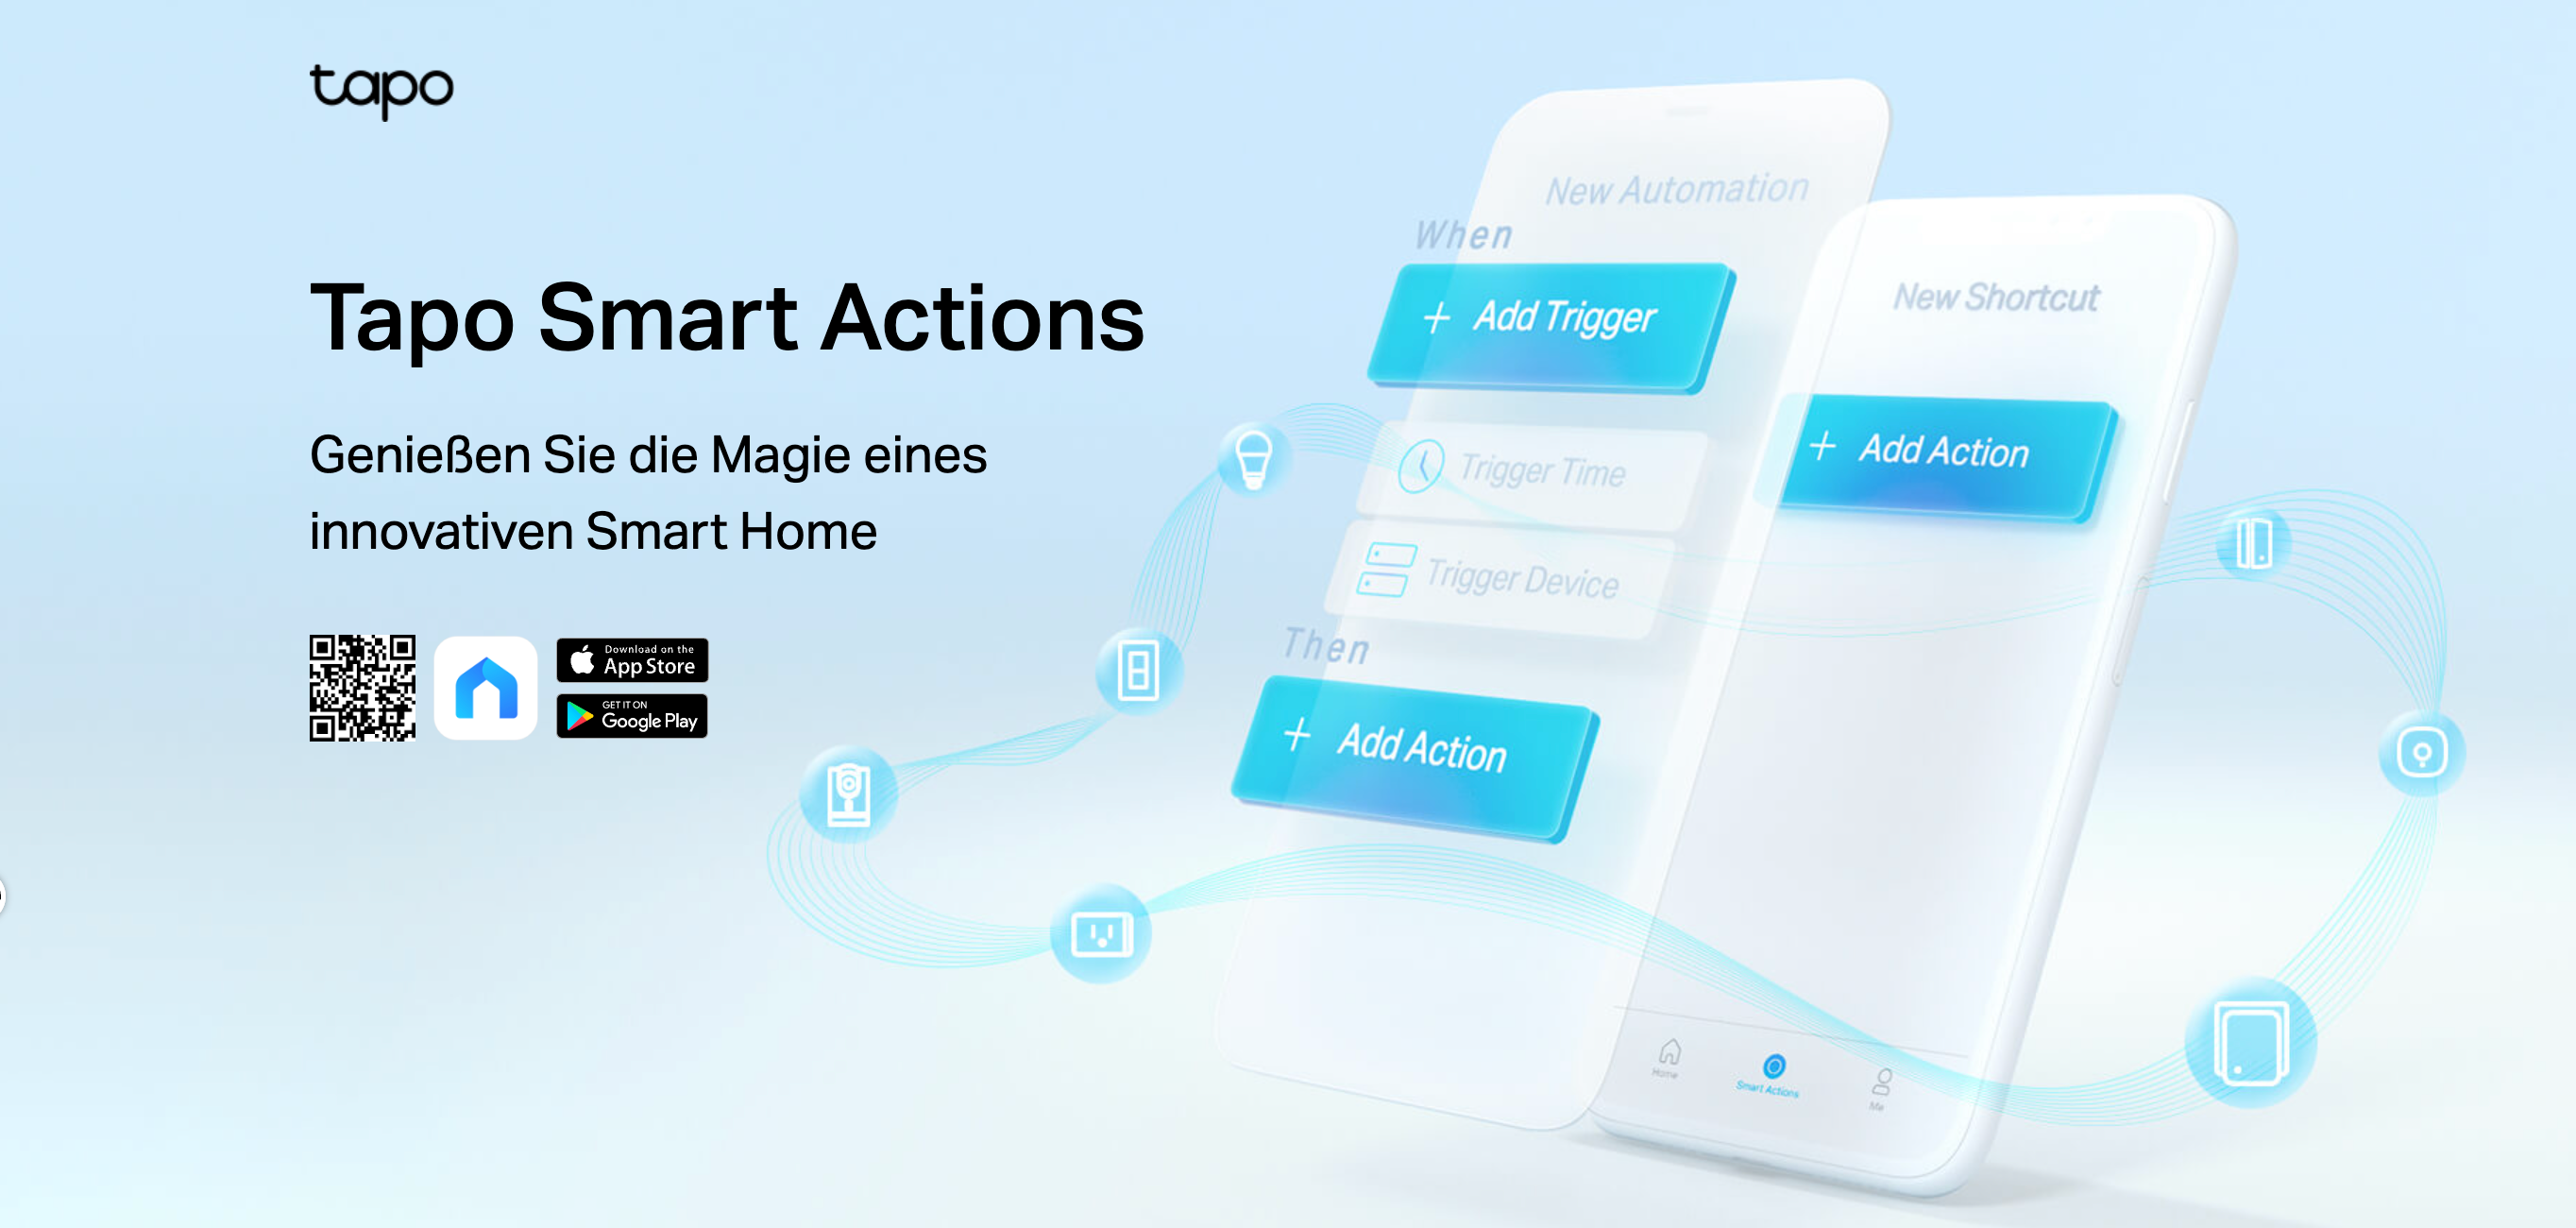 Tapo Smart Actions